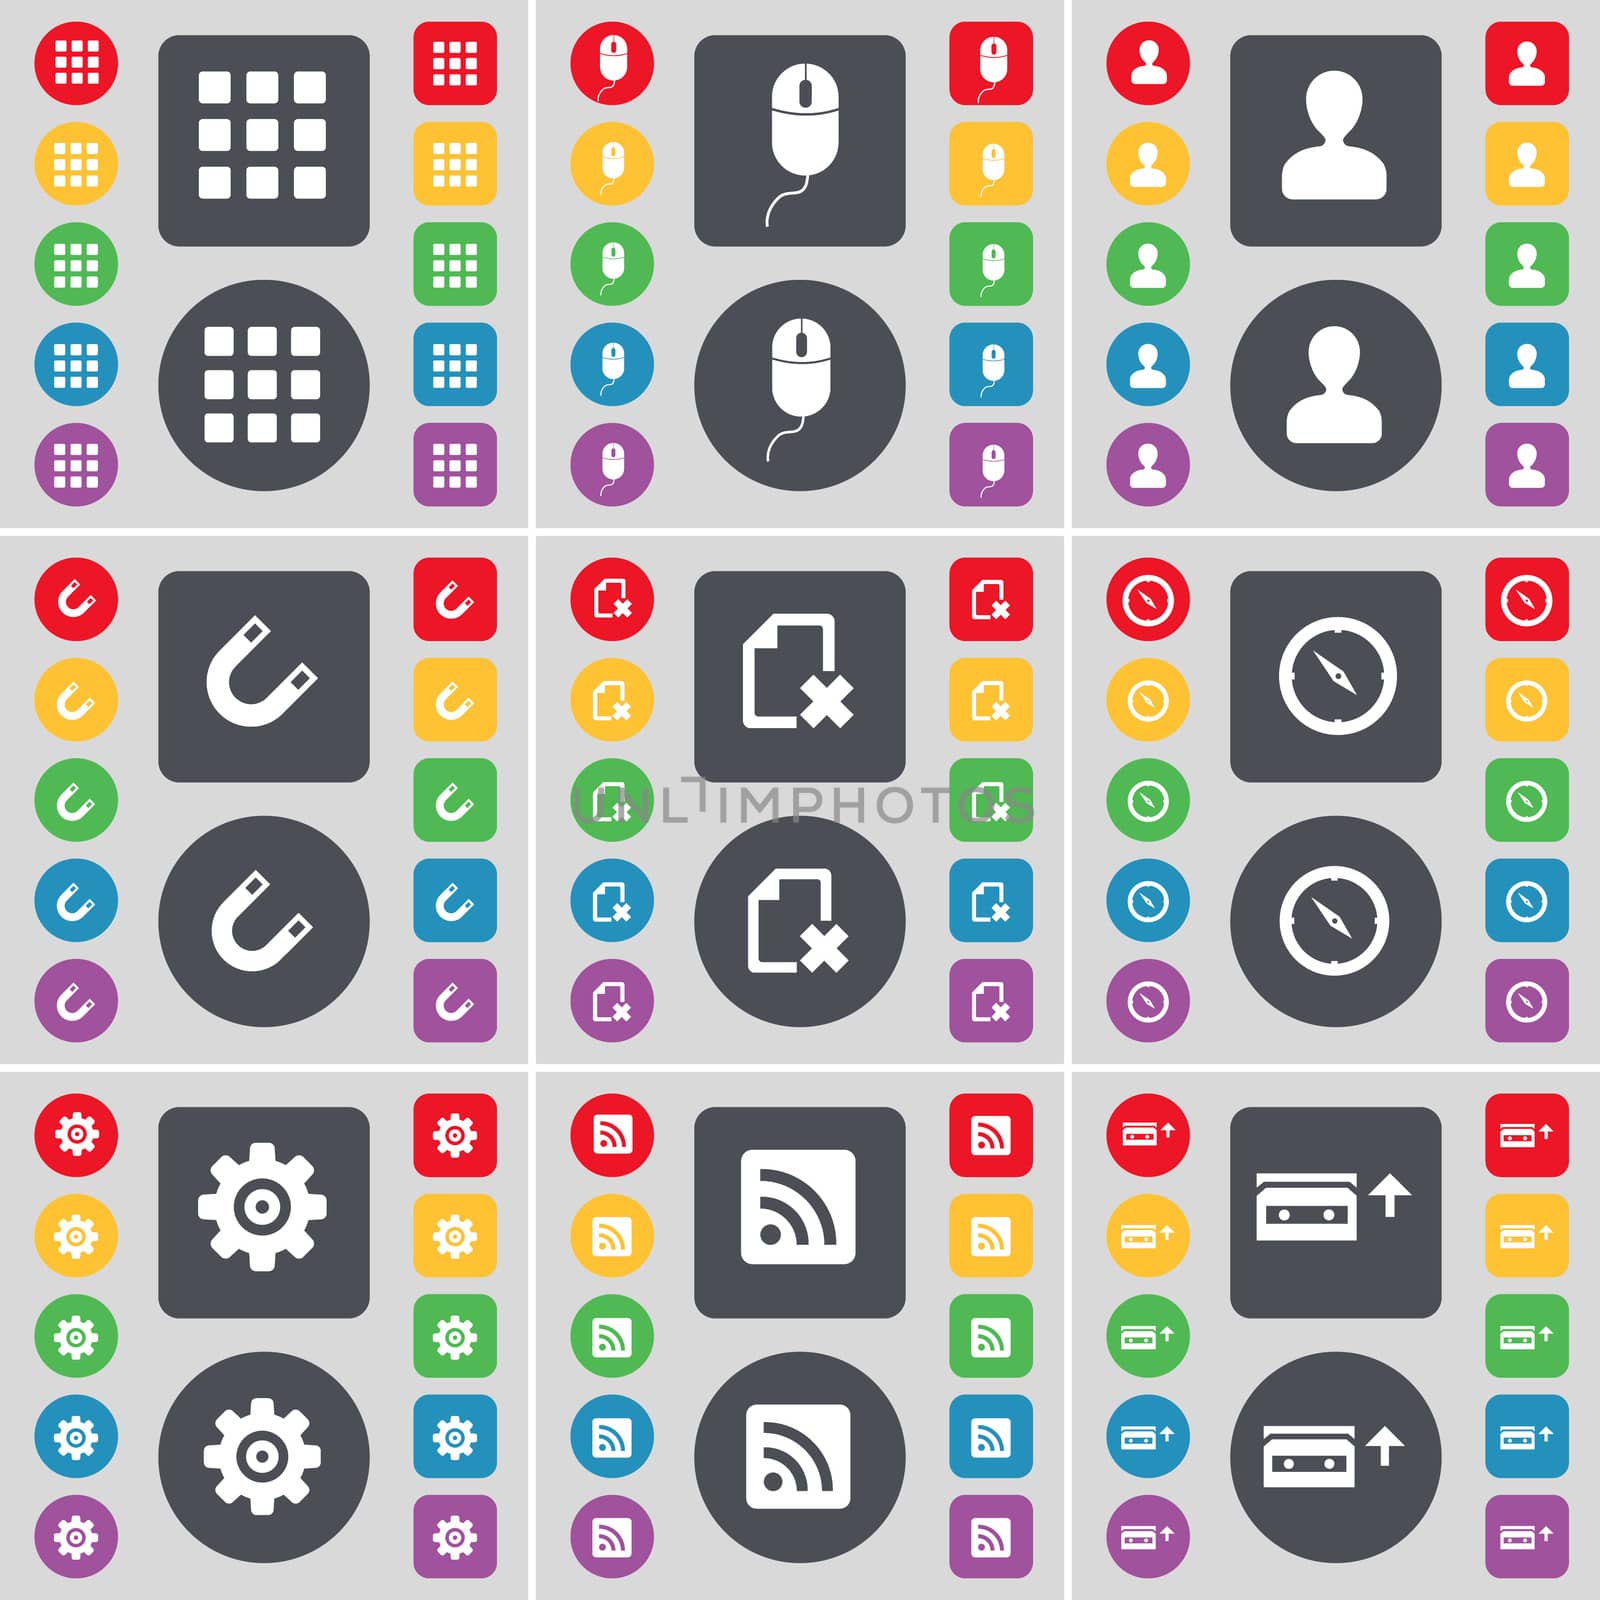 Apps, Mouse, Avatar, Magnet, File, Compass, Gear, RSS, Cassette icon symbol. A large set of flat, colored buttons for your design.  by serhii_lohvyniuk